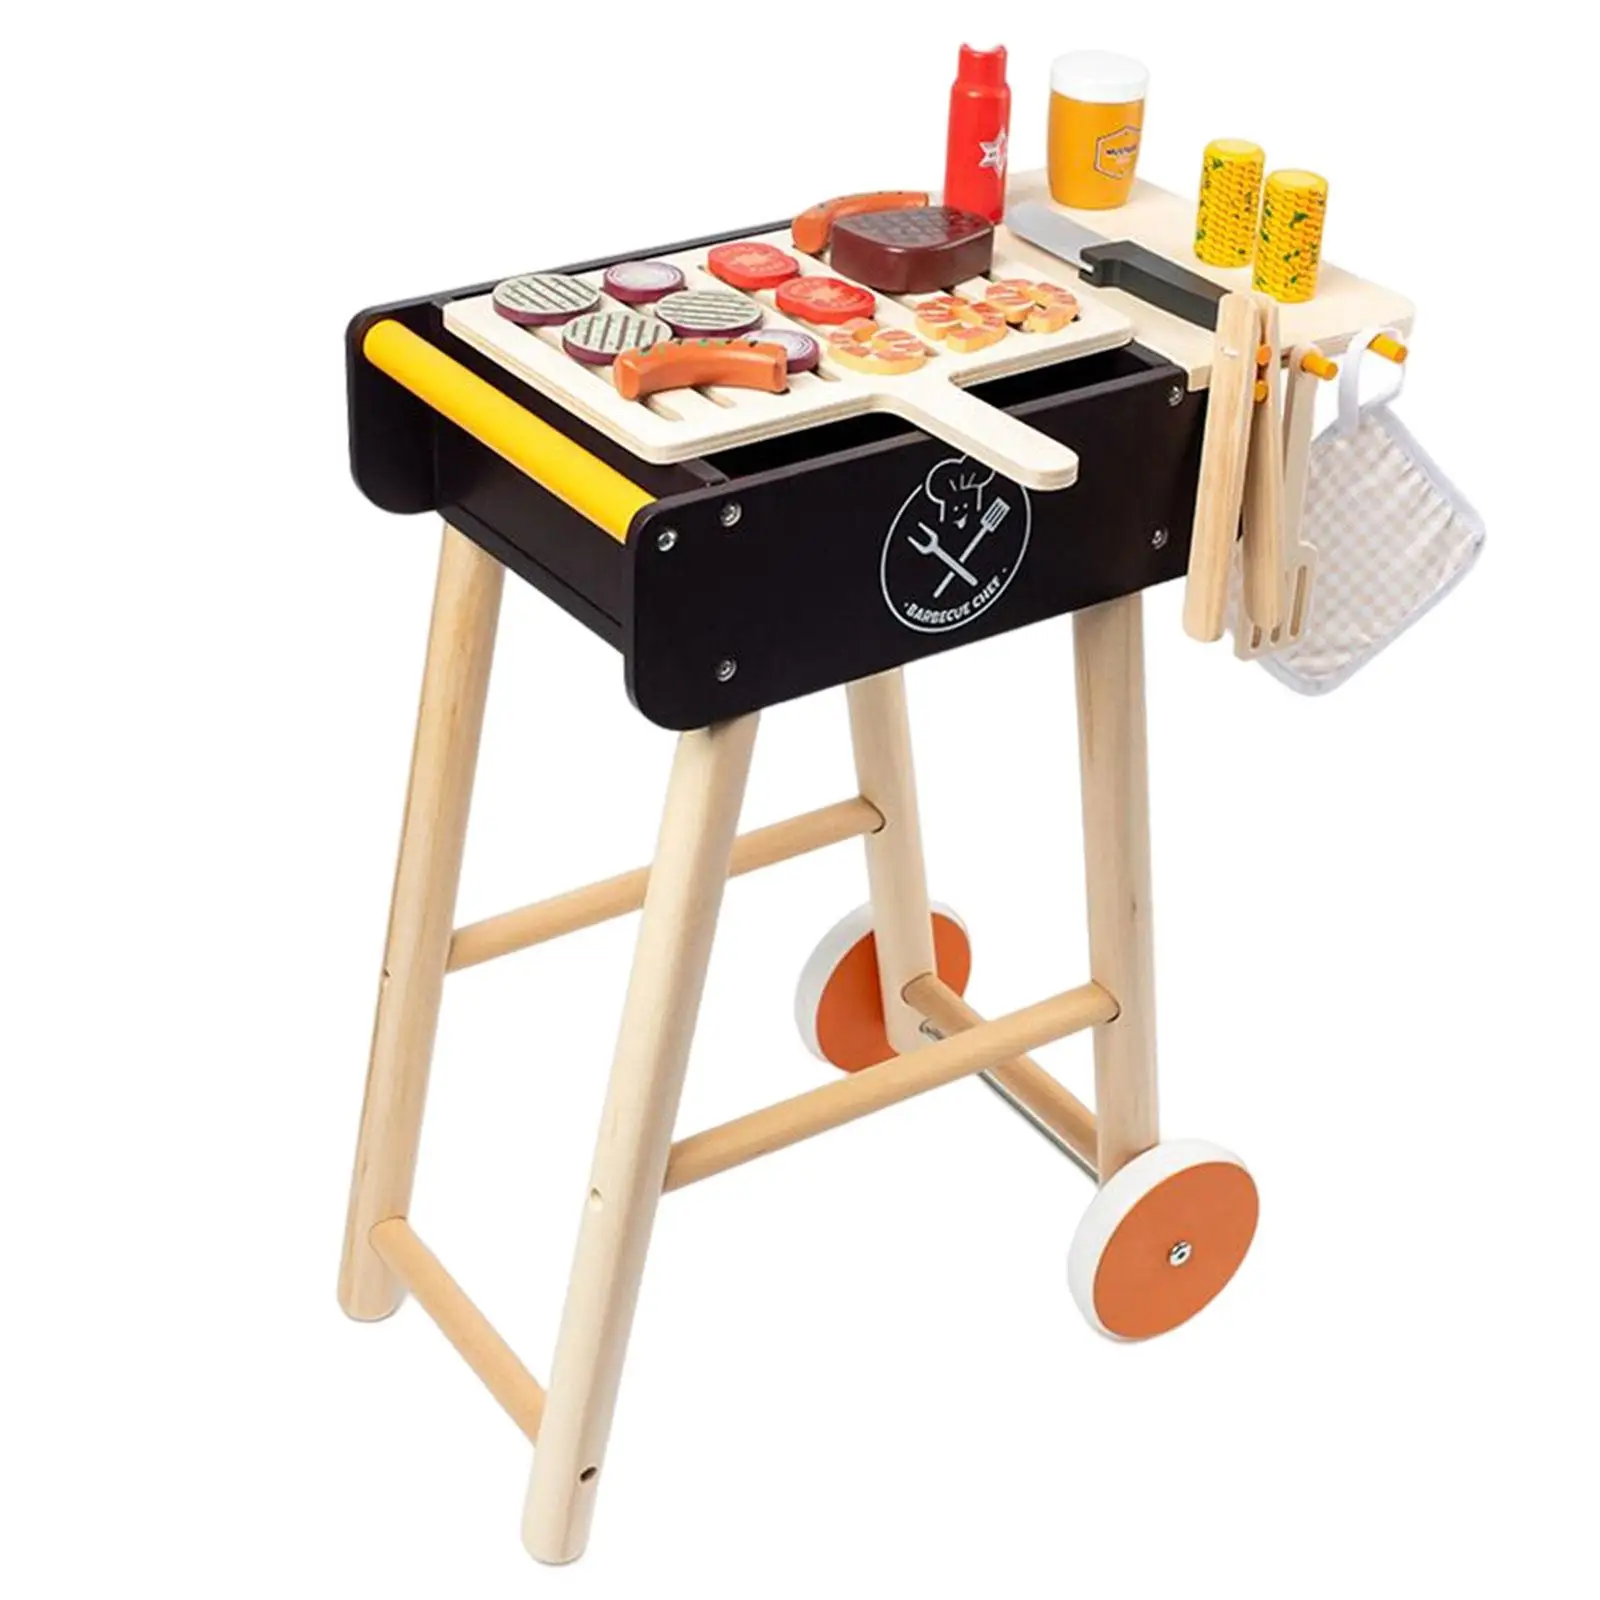 Simulation Wooden Toy BBQ Set Pretend Play Role Playing Toy Learning Educational Toy for Toddlers